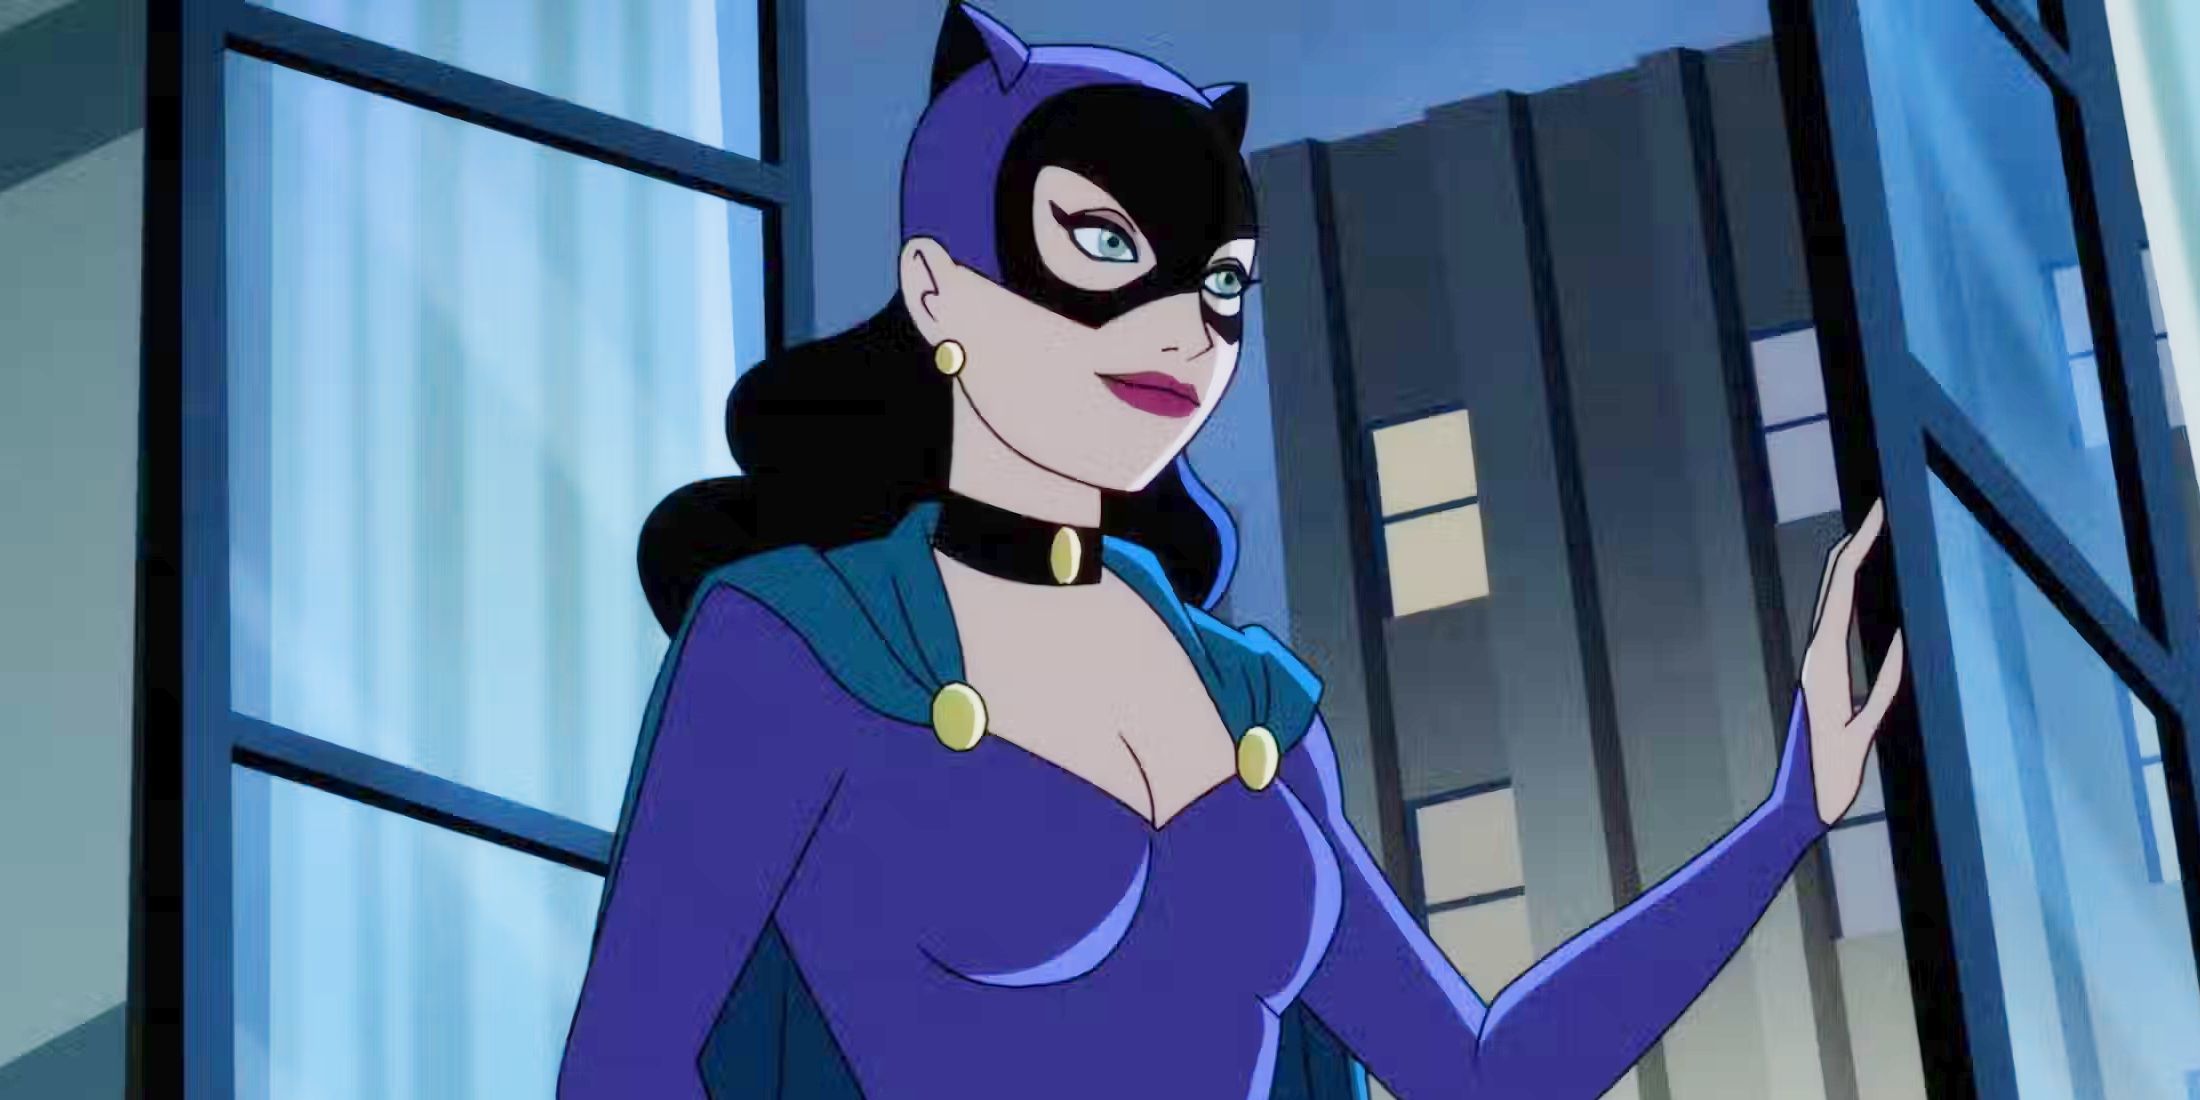 Wednesday Star voices Catwoman in “Batman: Caped Crusader”